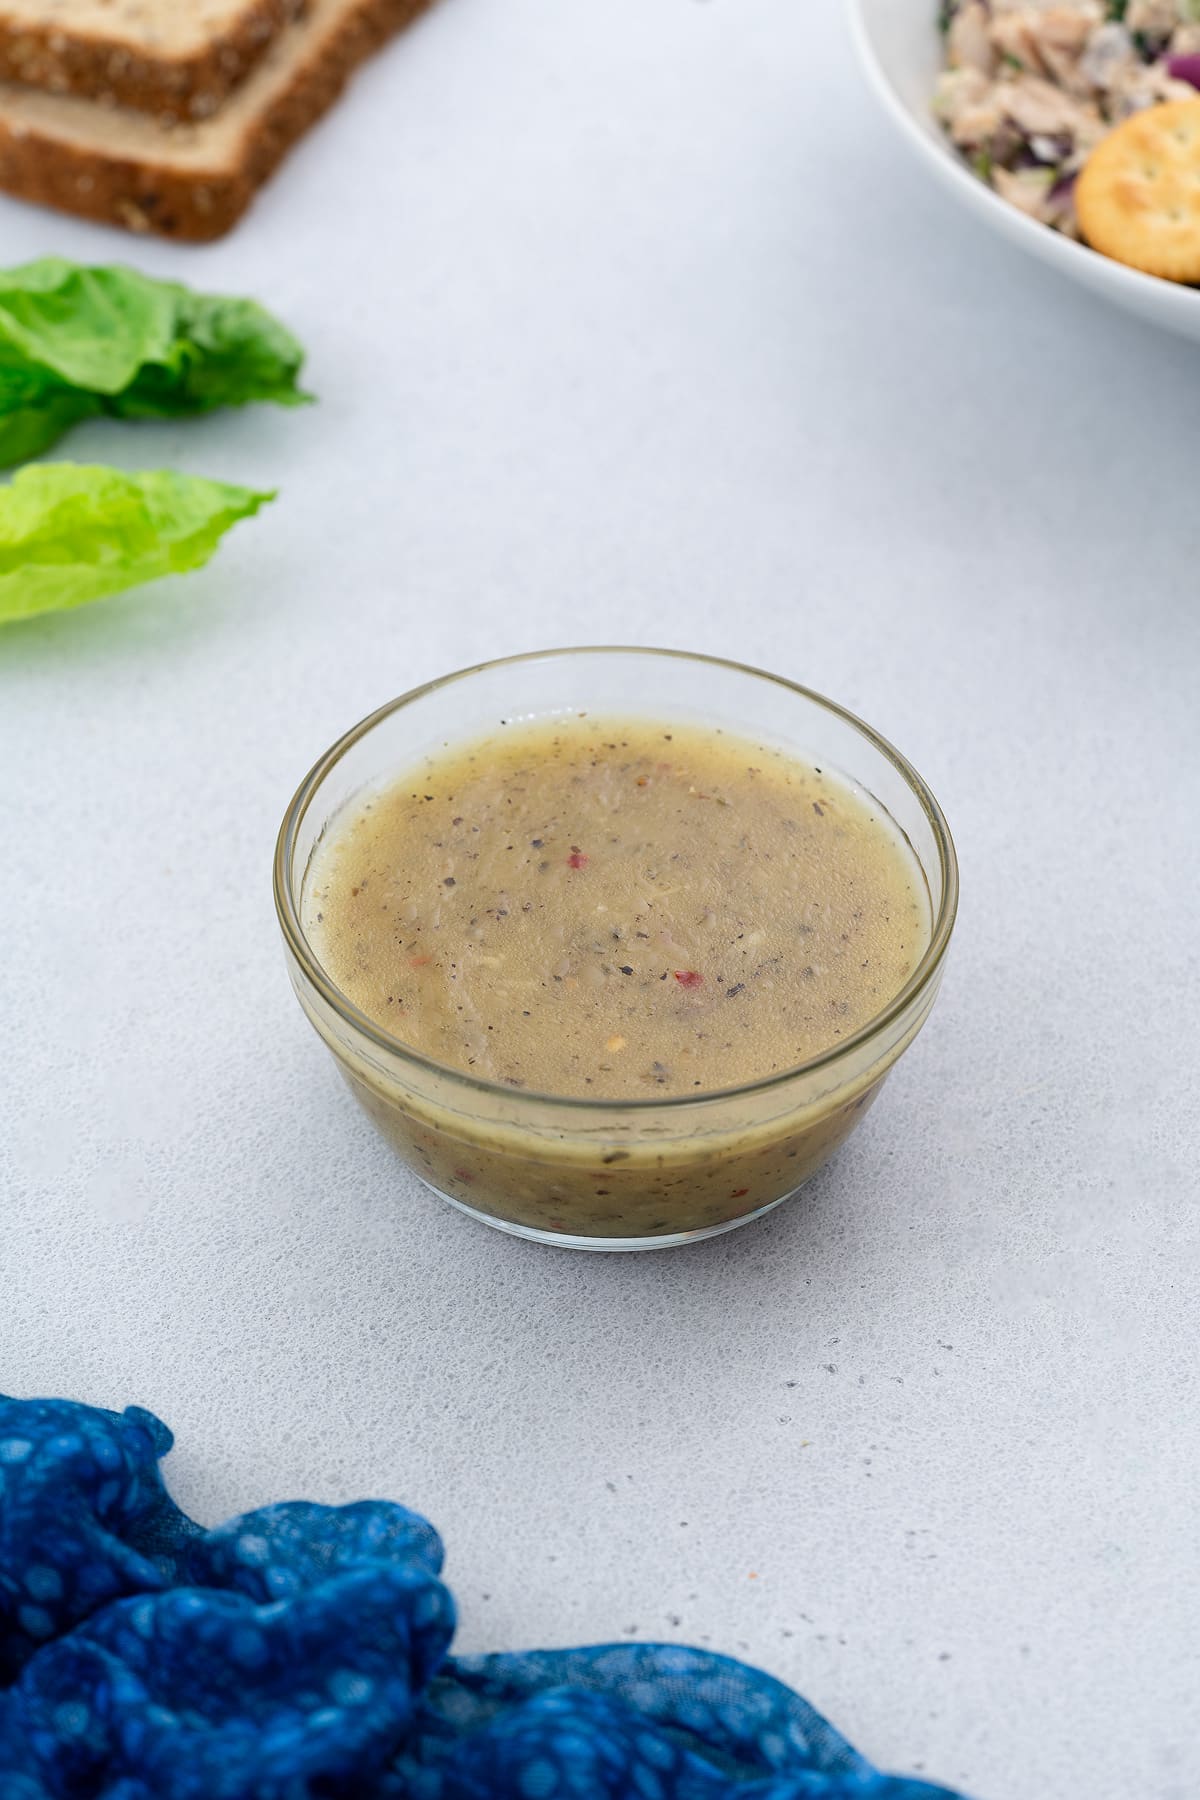 Salad dressing in a glass bowl on a white table with salad, bread slices, and lettuce leaves arranged around it.